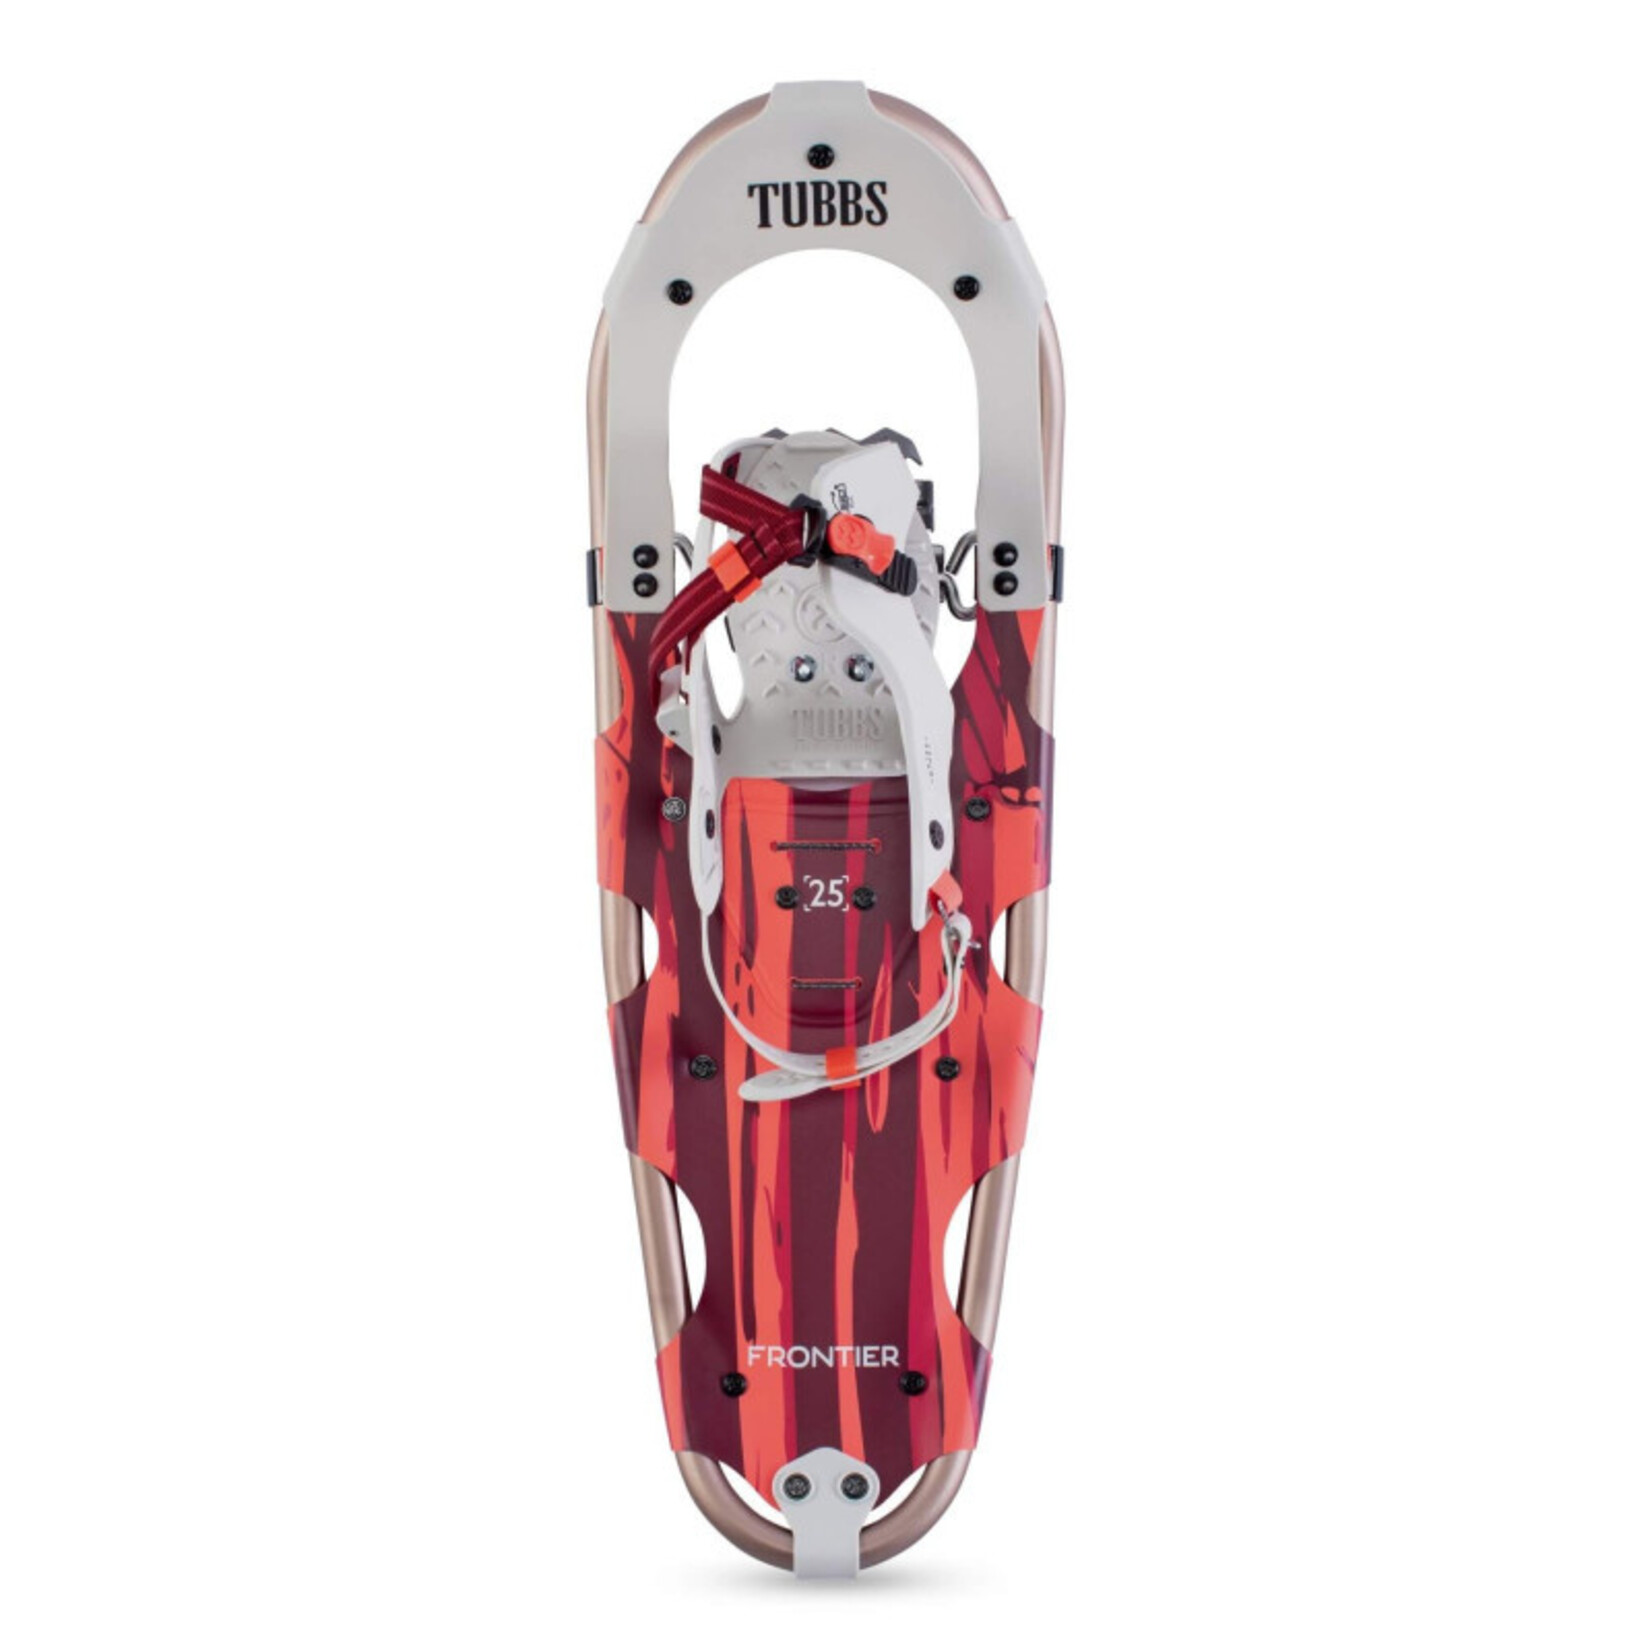 Tubbs Frontier 25 W Snowshoes